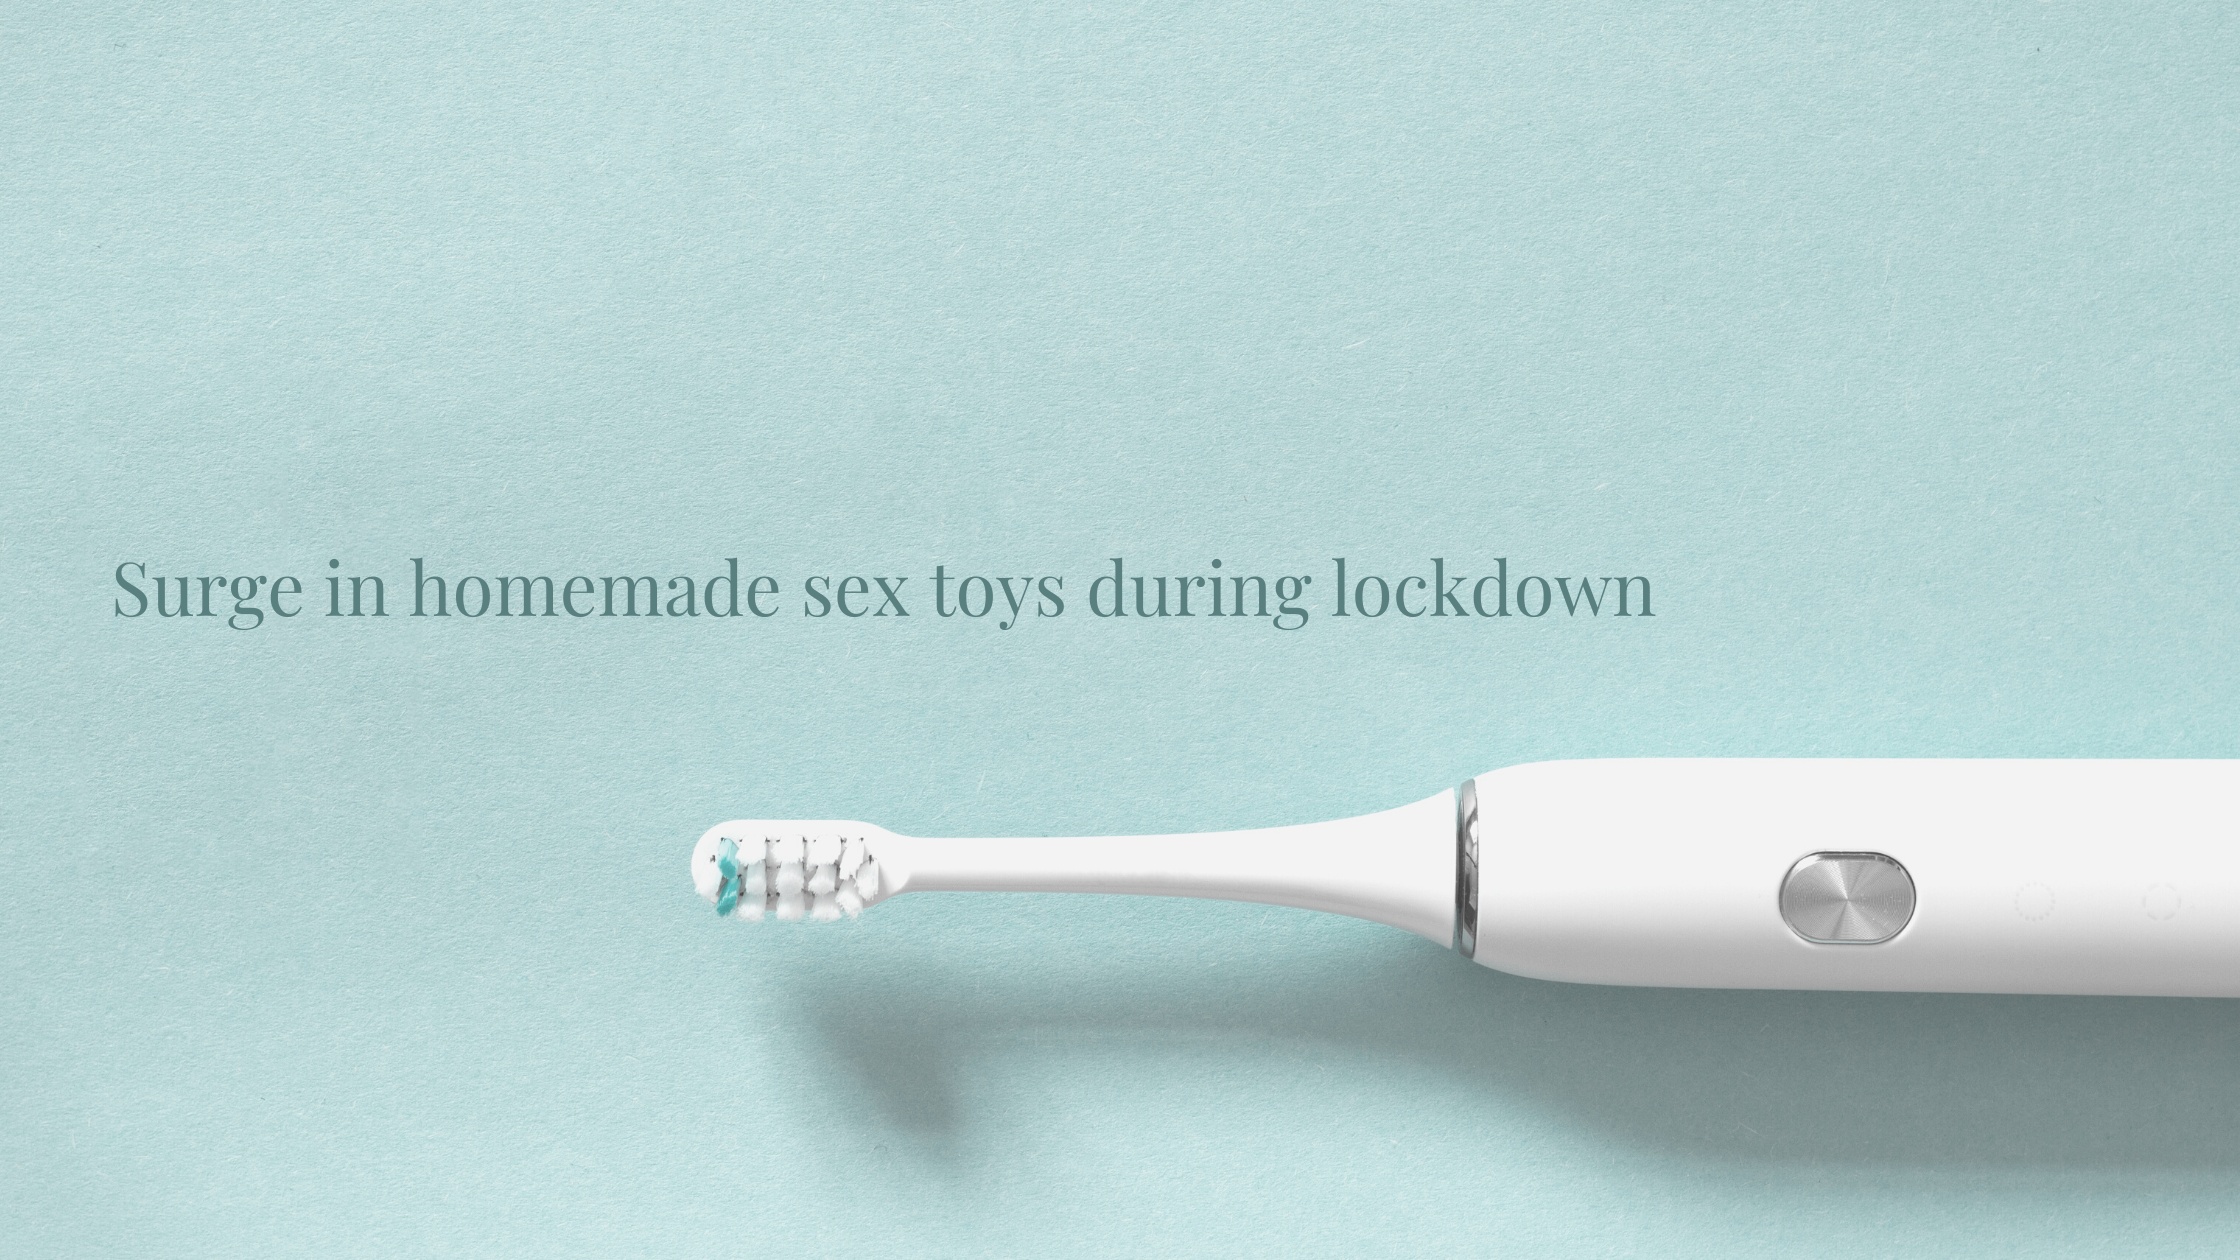 Surge in homemade sex toys during lockdown photo